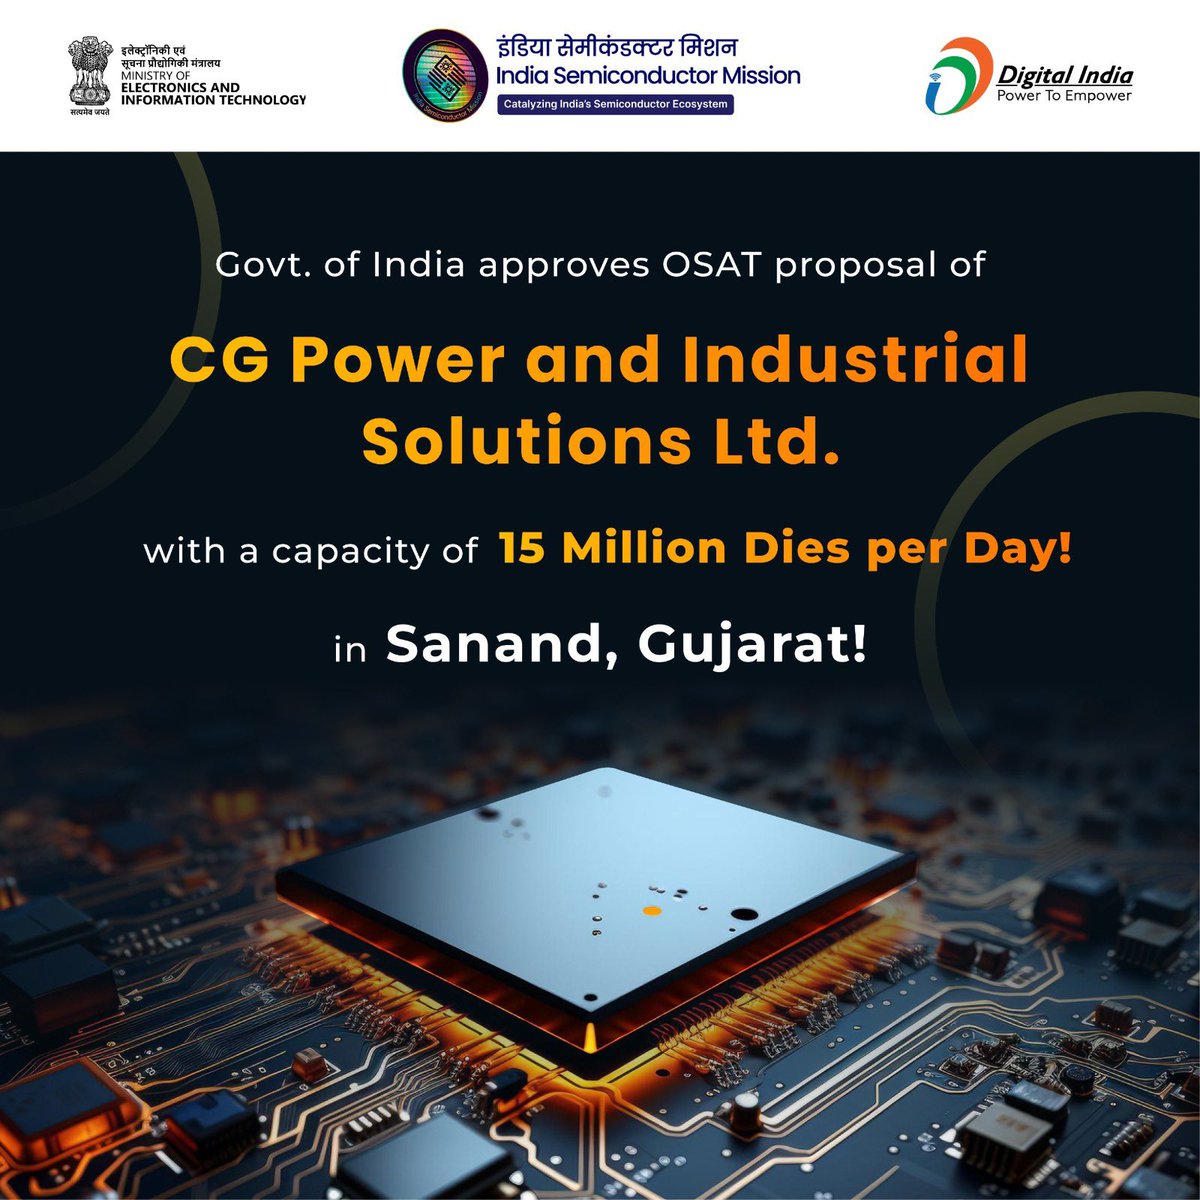 #CGPower & Industrial Solutions Ltd. to set up a Semiconductor #OSAT facility in Sanand, #Gujarat, with a total investment of ₹7.6k crore!